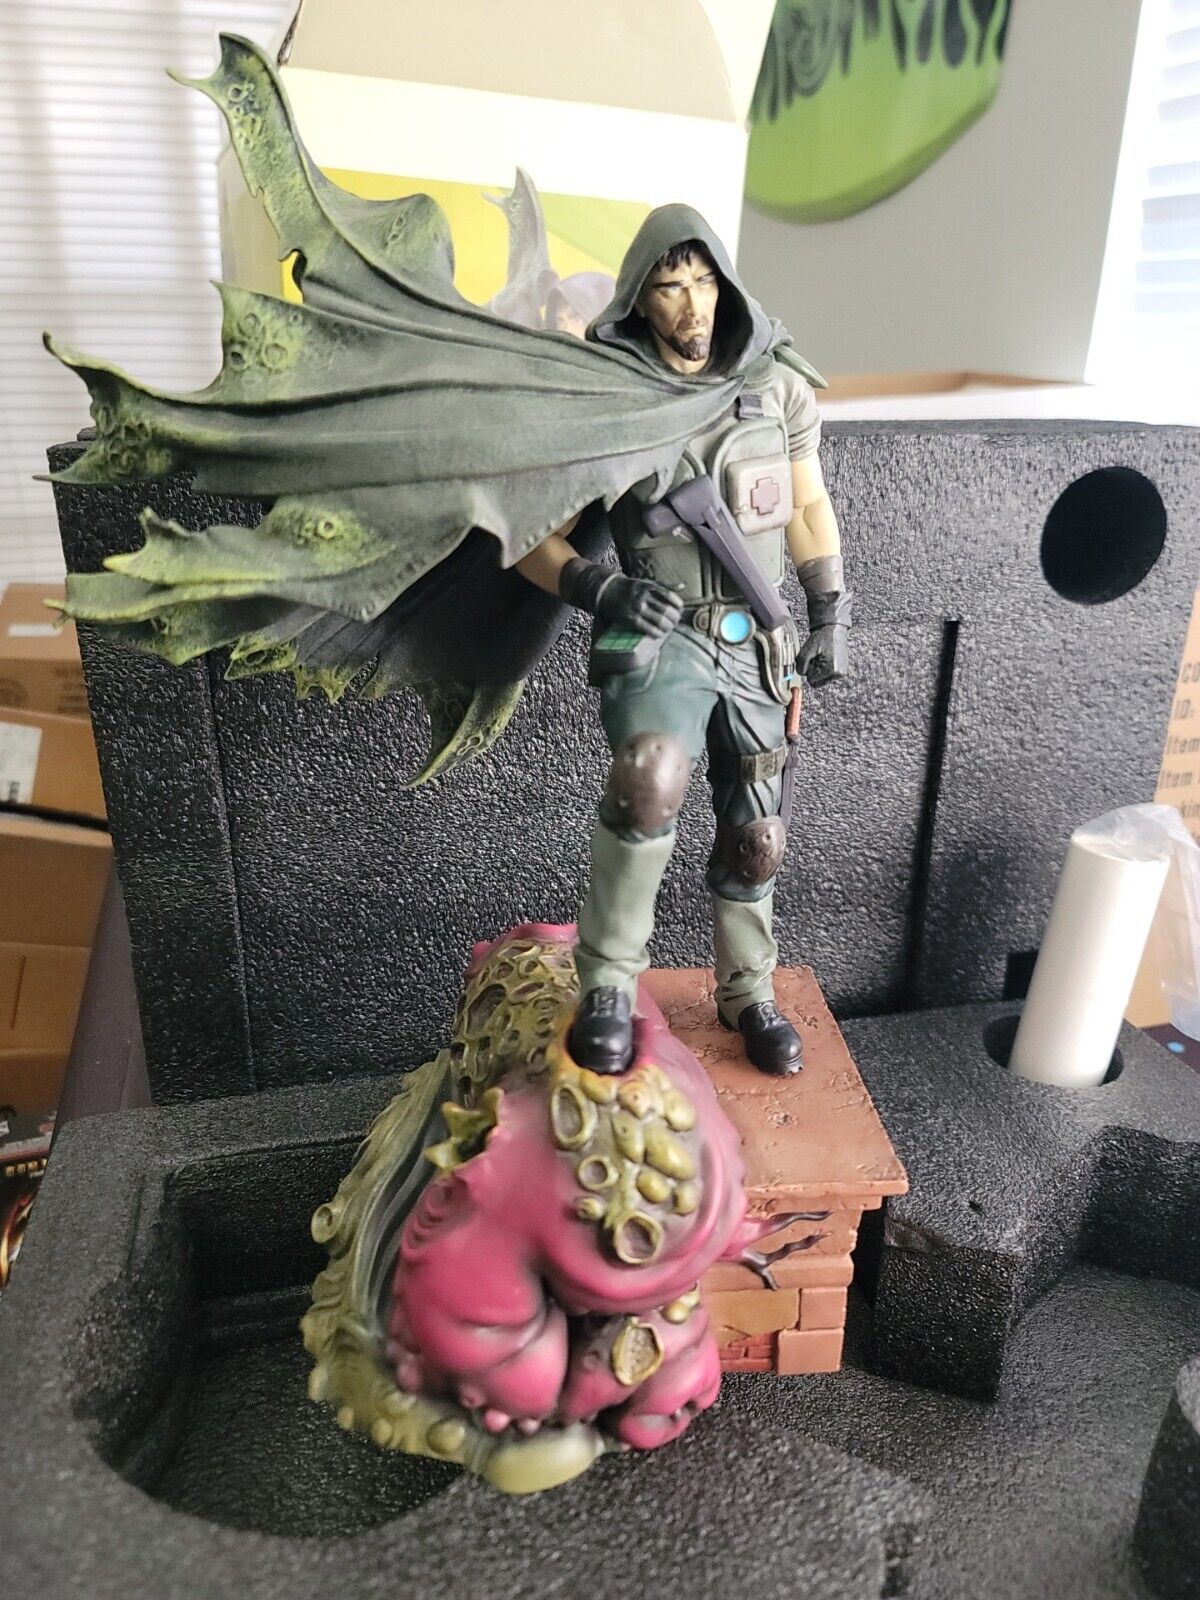 oblivion song Statue Issue #1 collectors edition RARE  1 Of Only  1,000 Made